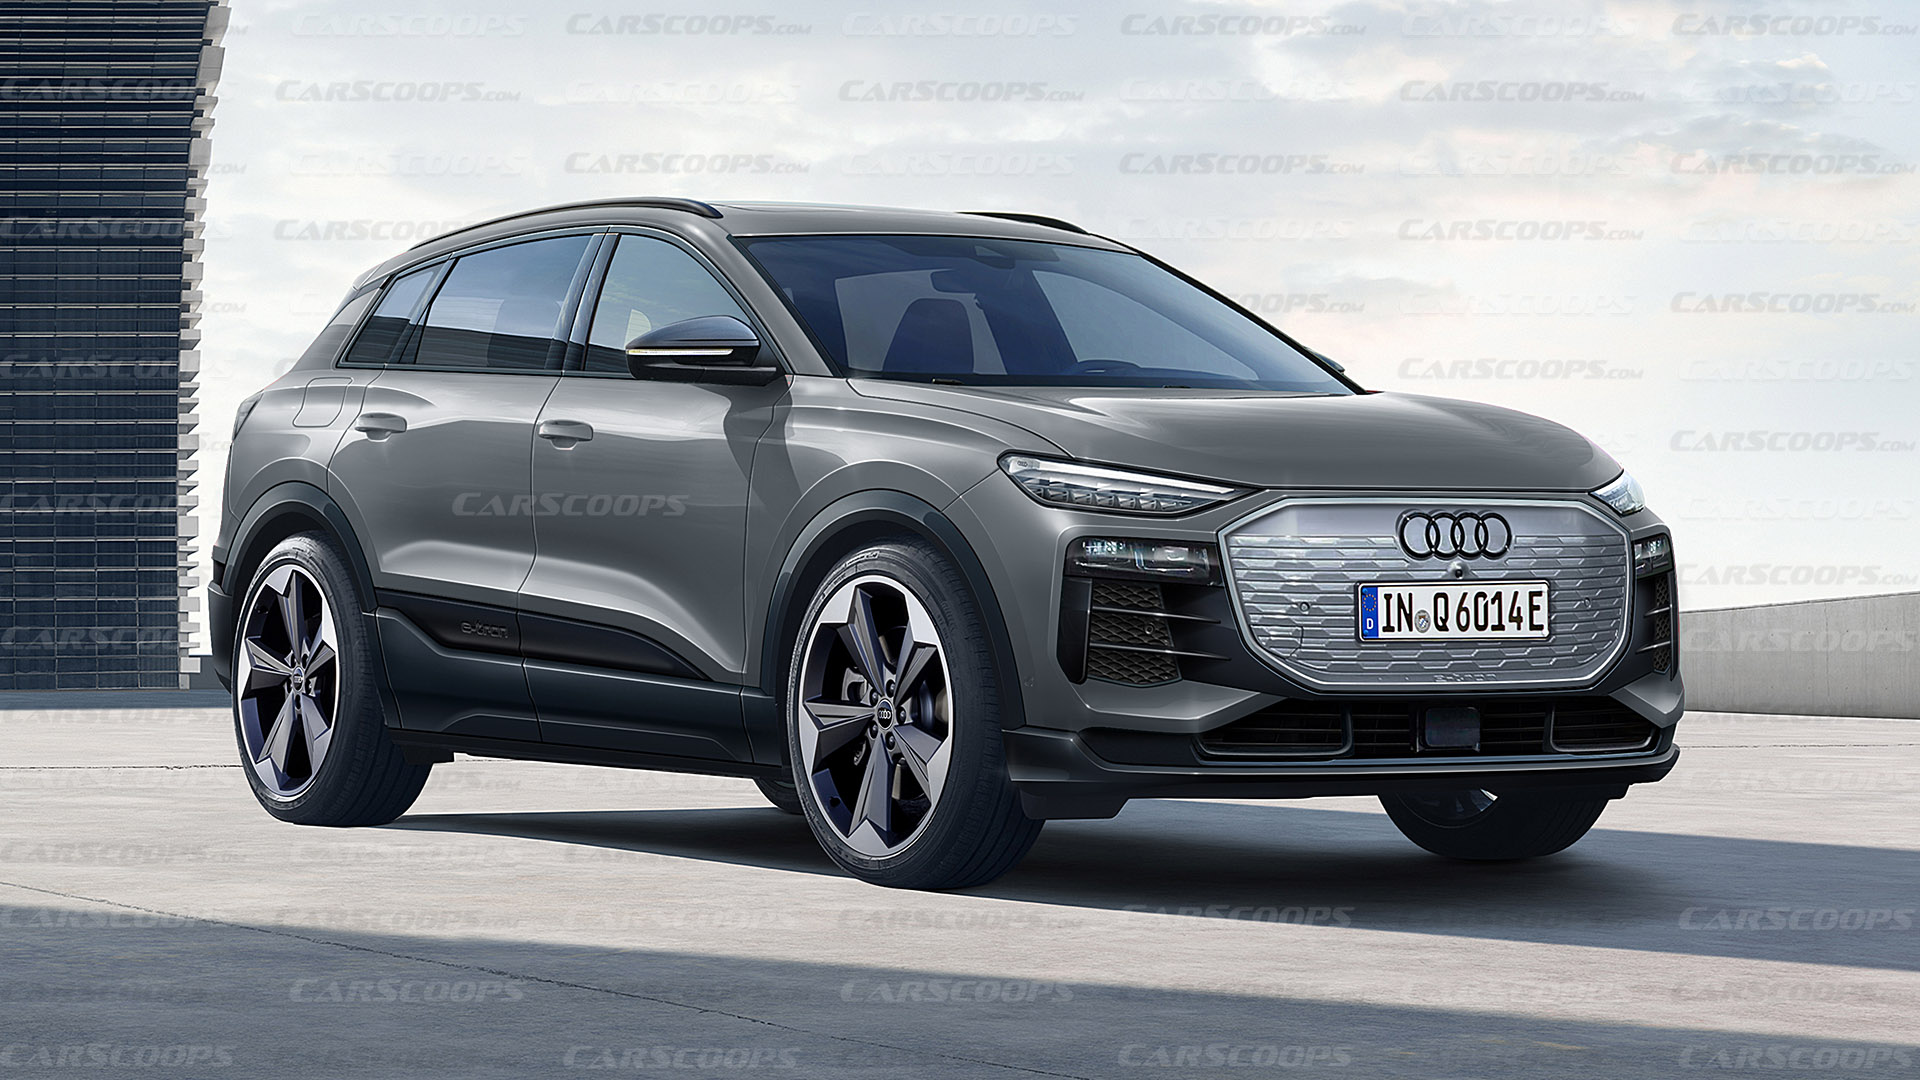 New Audi Q6 E-Tron: Everything We Know About The Premium Electric SUV ...